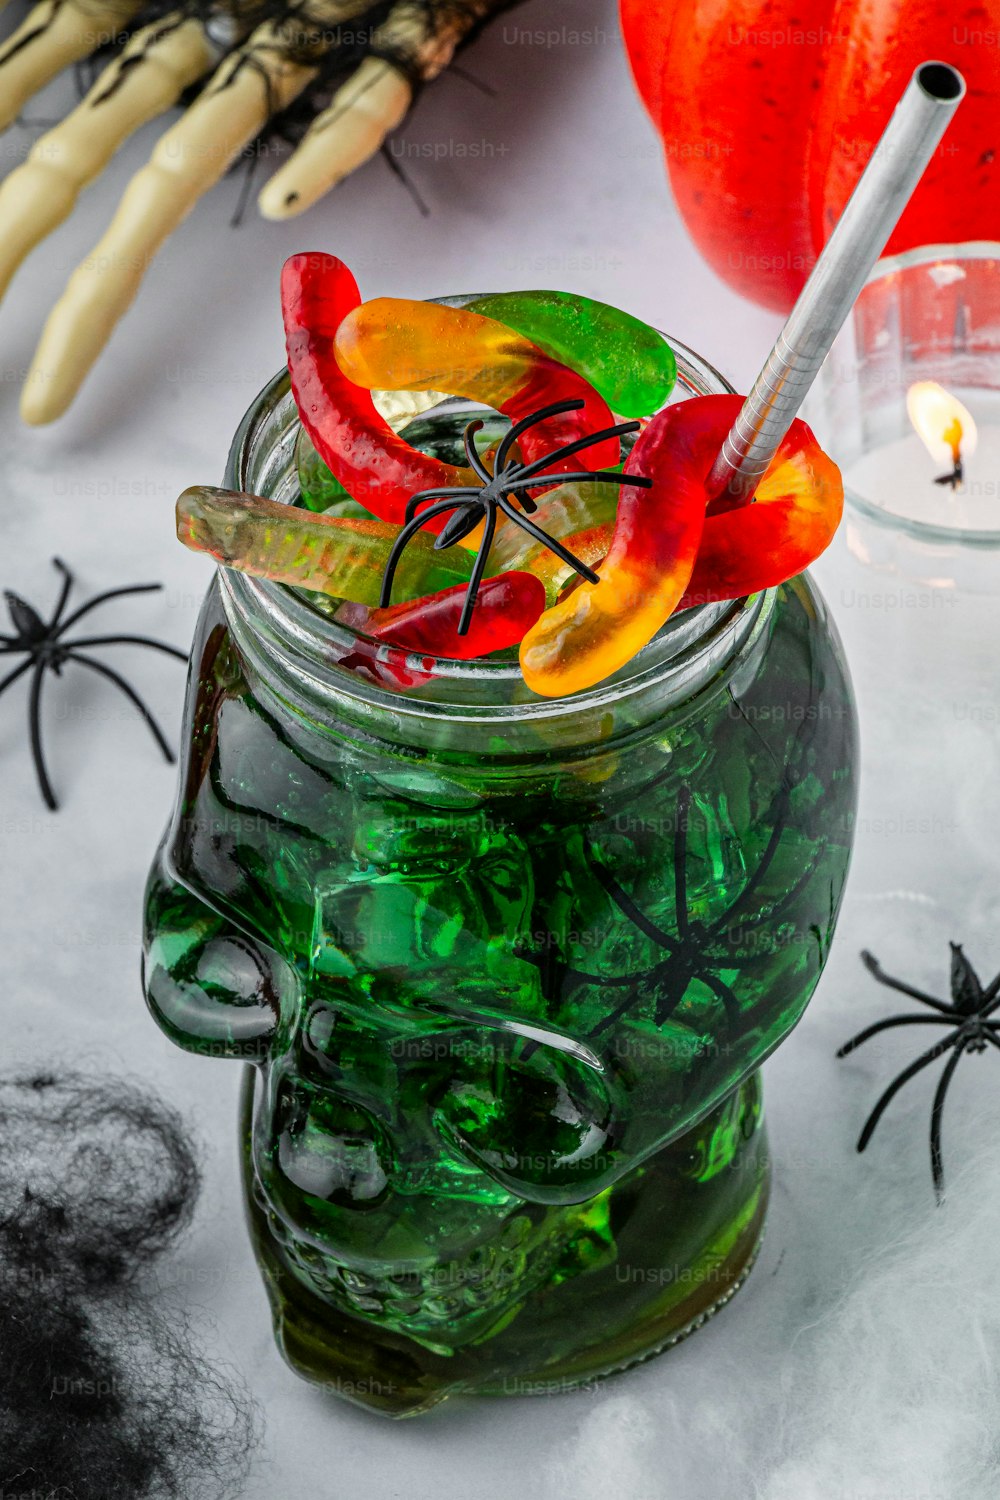 a glass jar filled with green liquid and halloween decorations